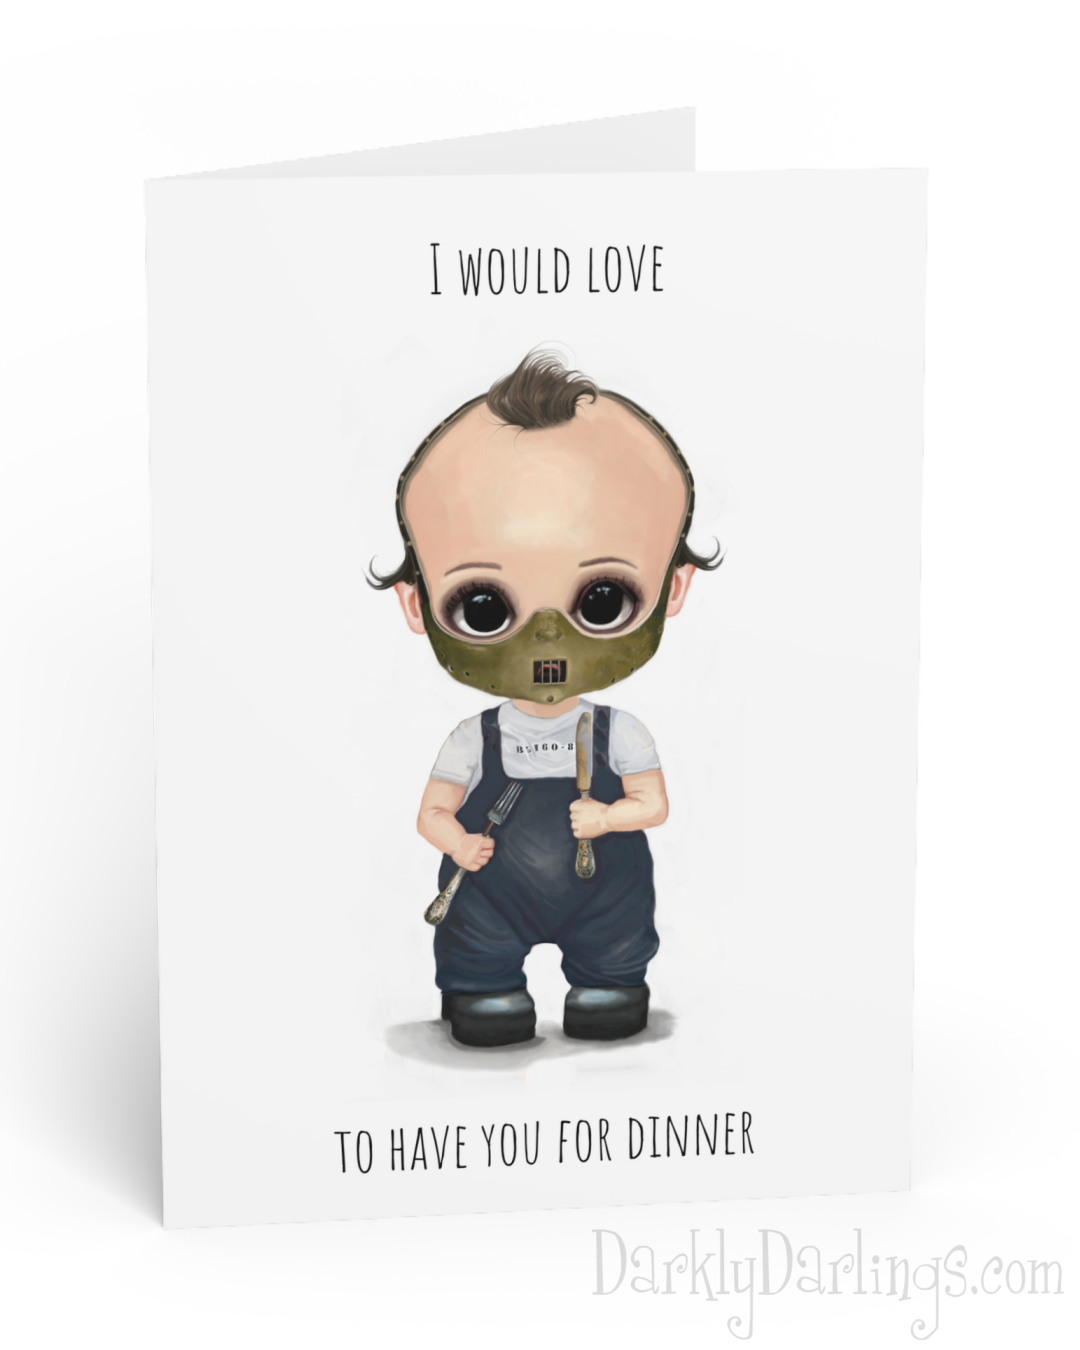 Hannibal Lecter from Silence of the Lambs on a card